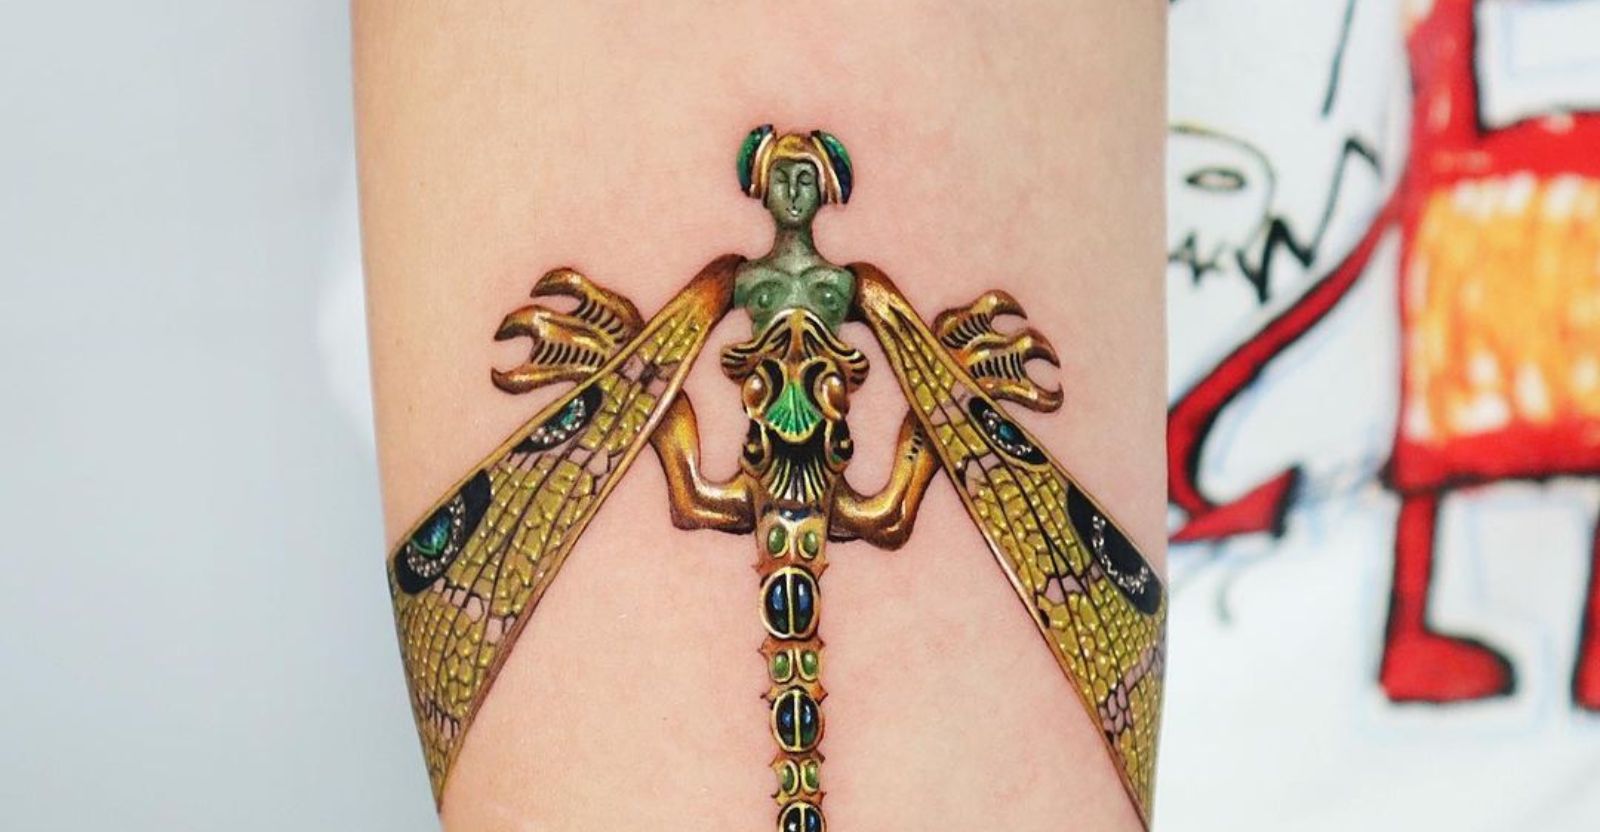 Skin-Crawling Tattoos: Insect Body Art